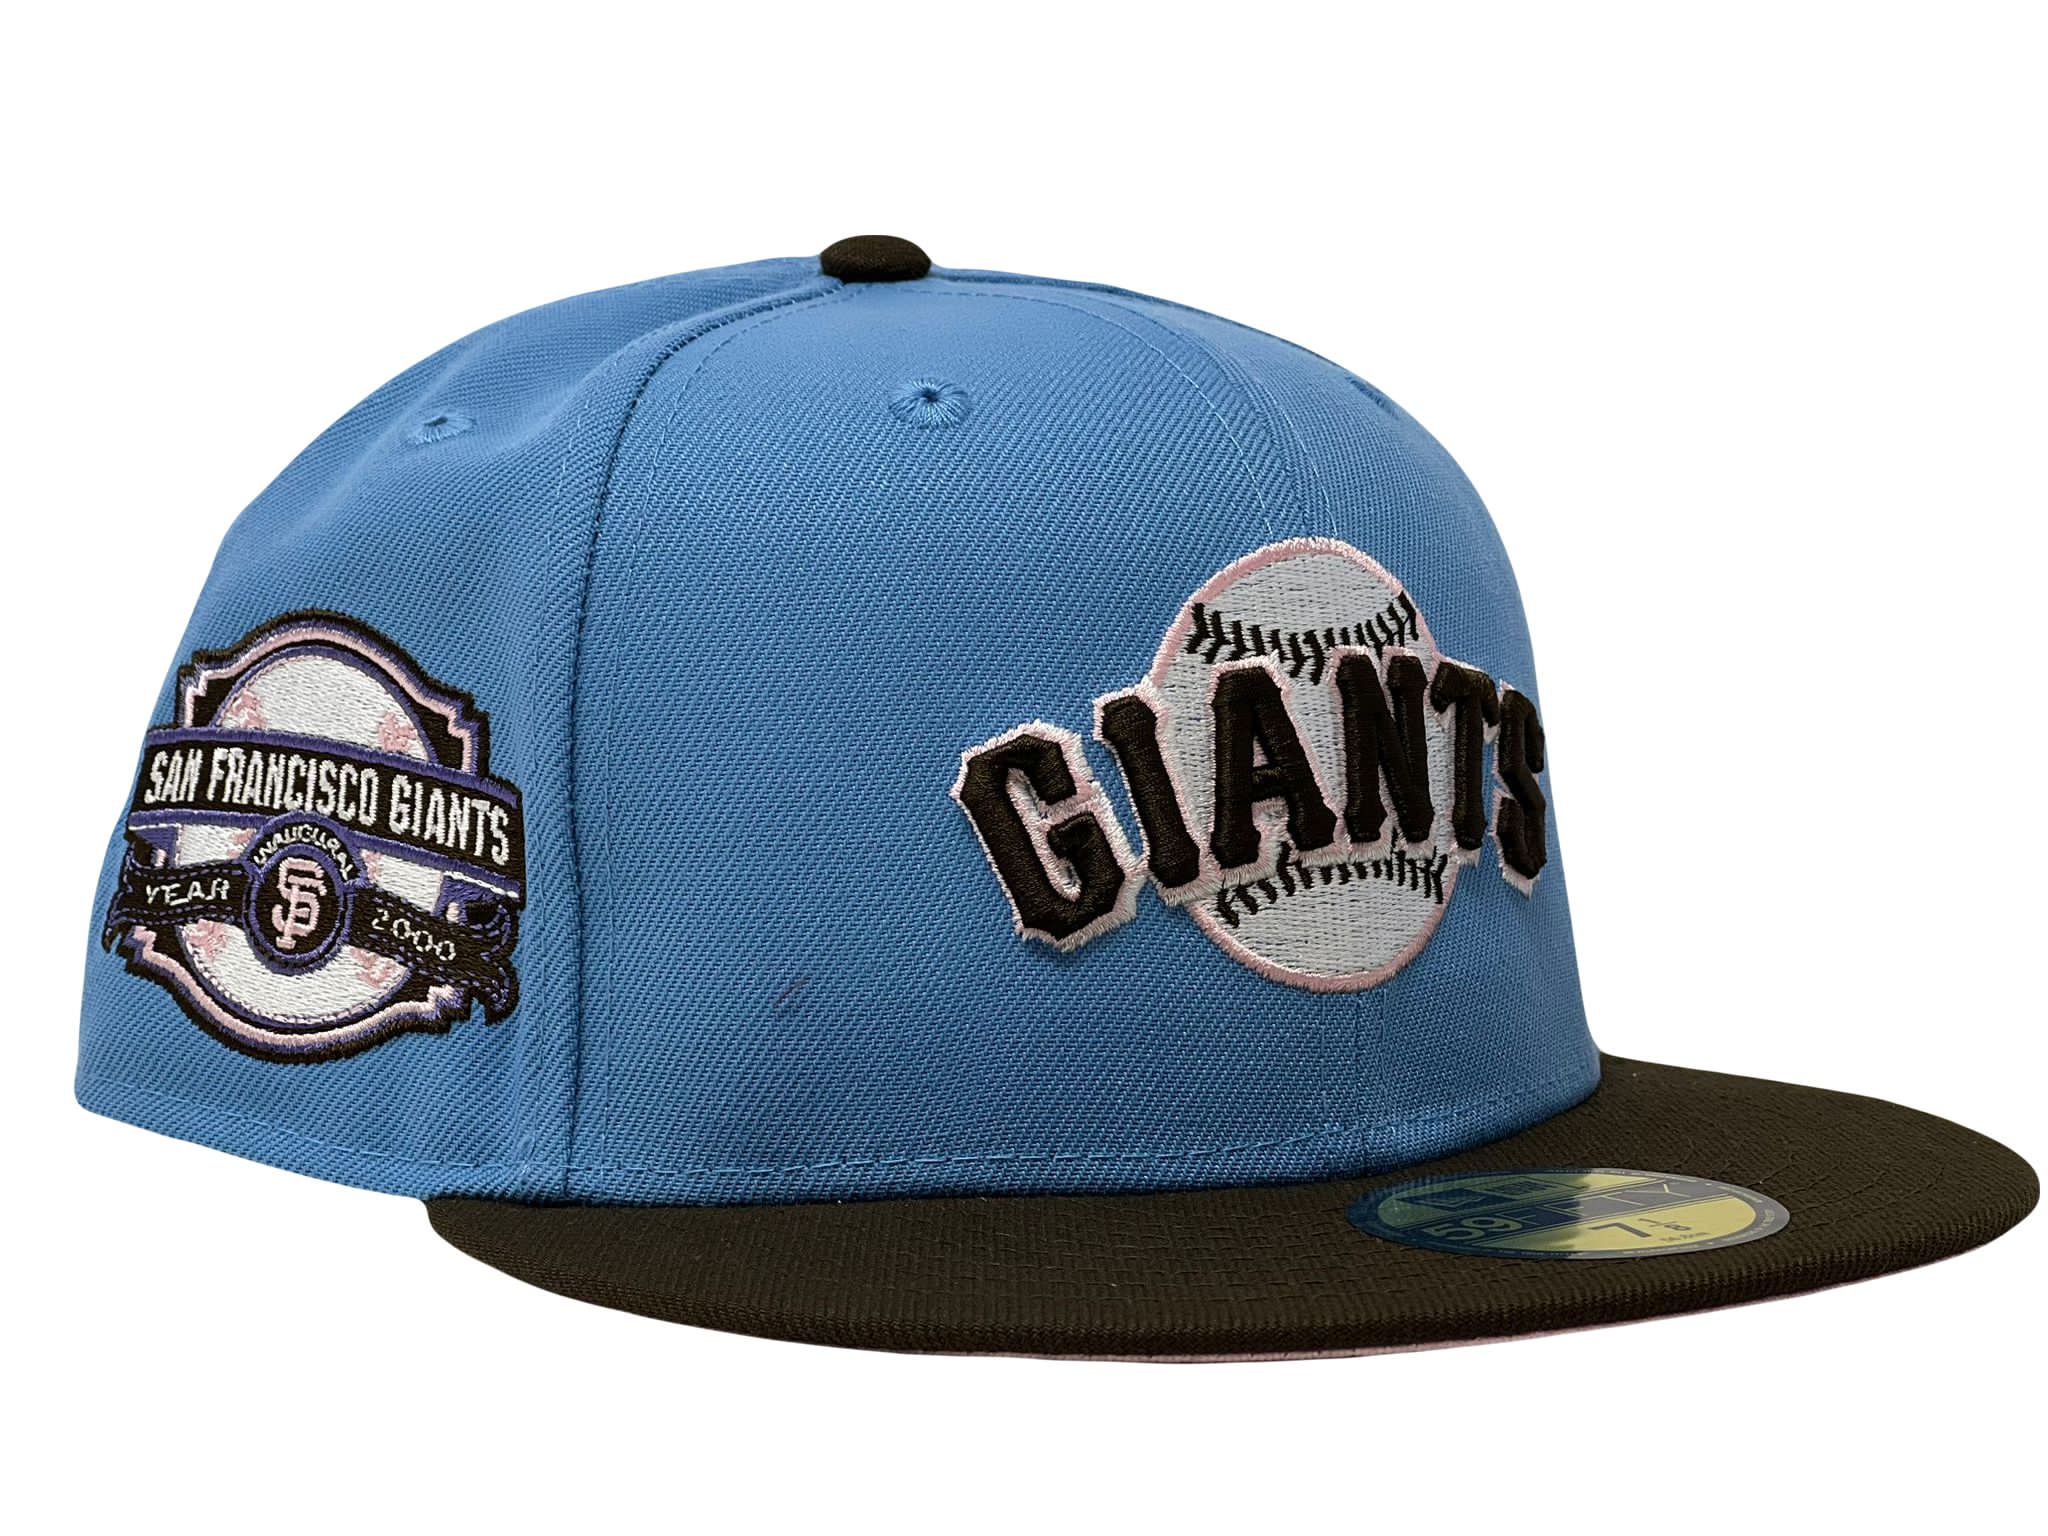 San Francisco Giants Hat Blue & White Fitted Cap New Era 59FIFTY 7 3/8 USA